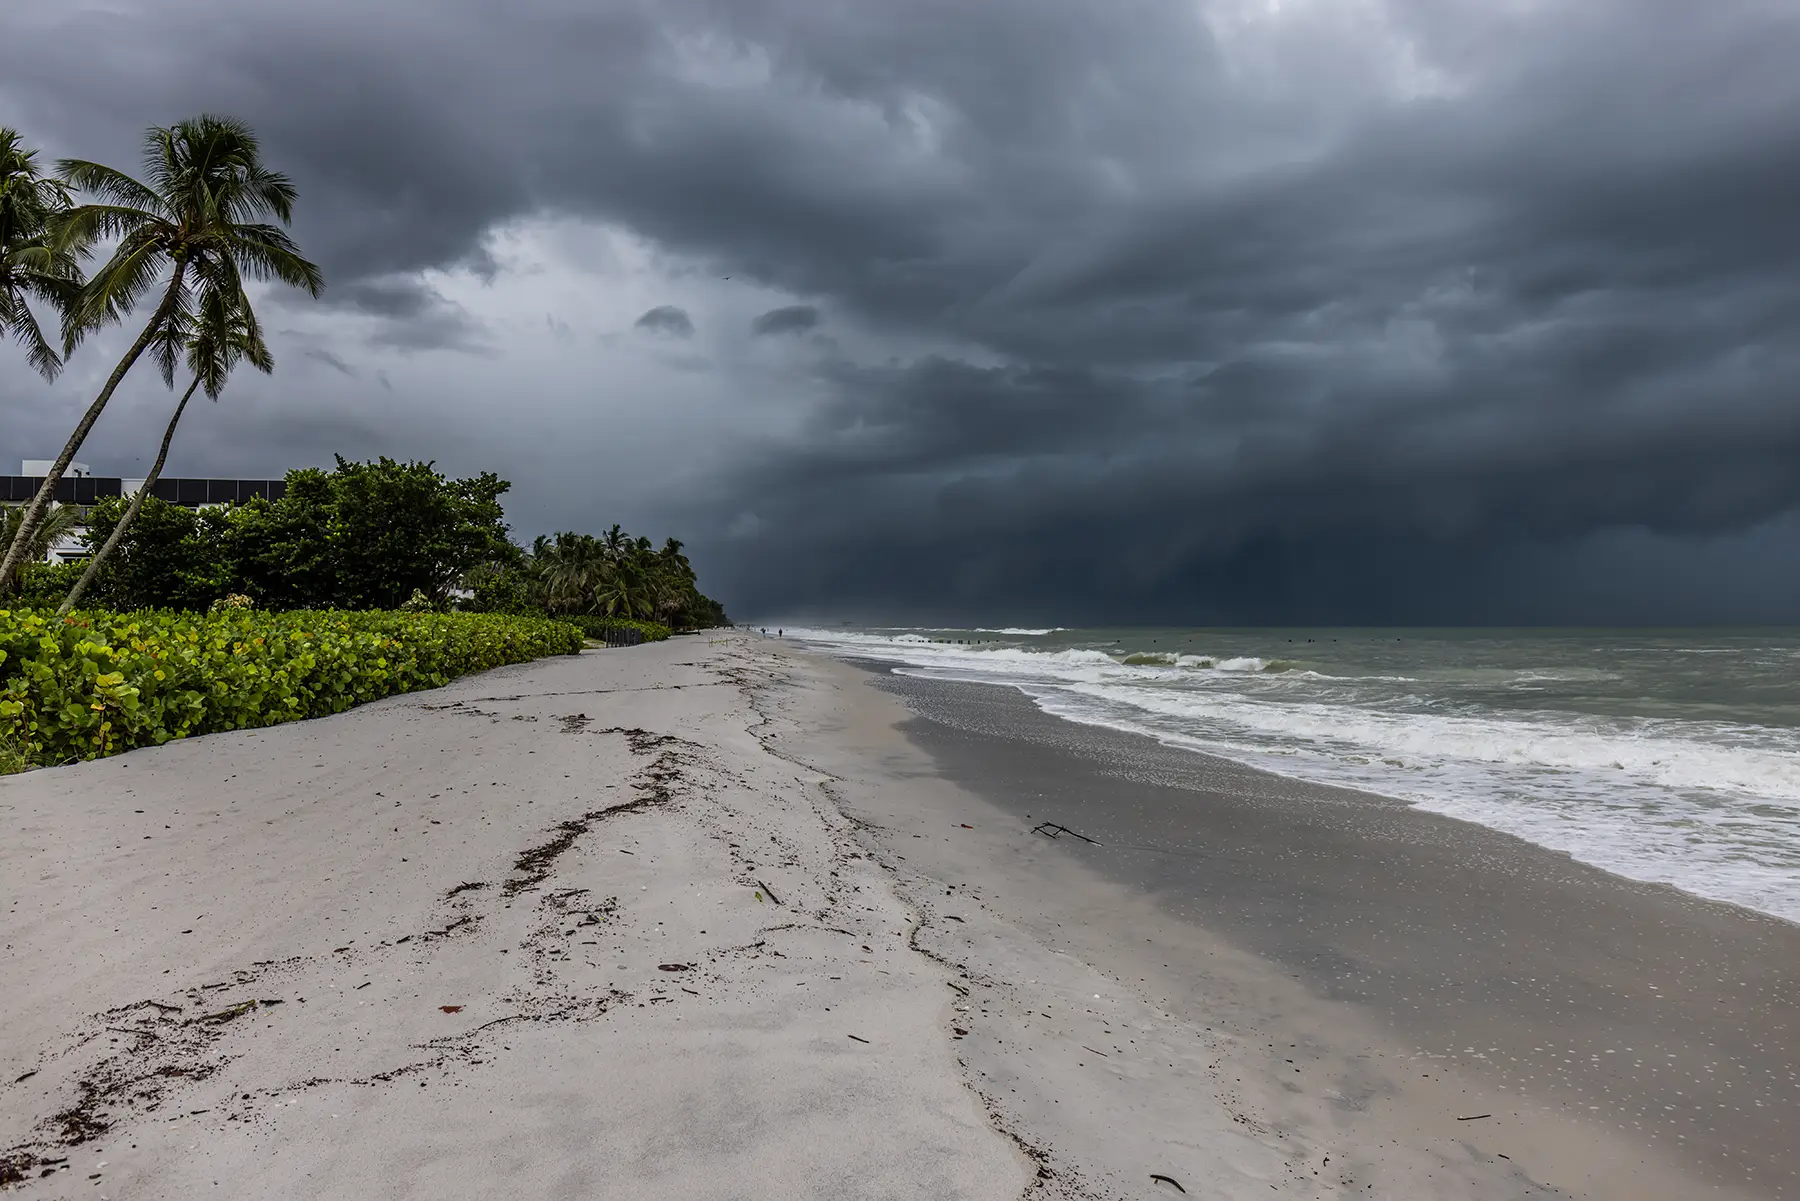 Coastal image of palm tree and beach with impending storm clouds